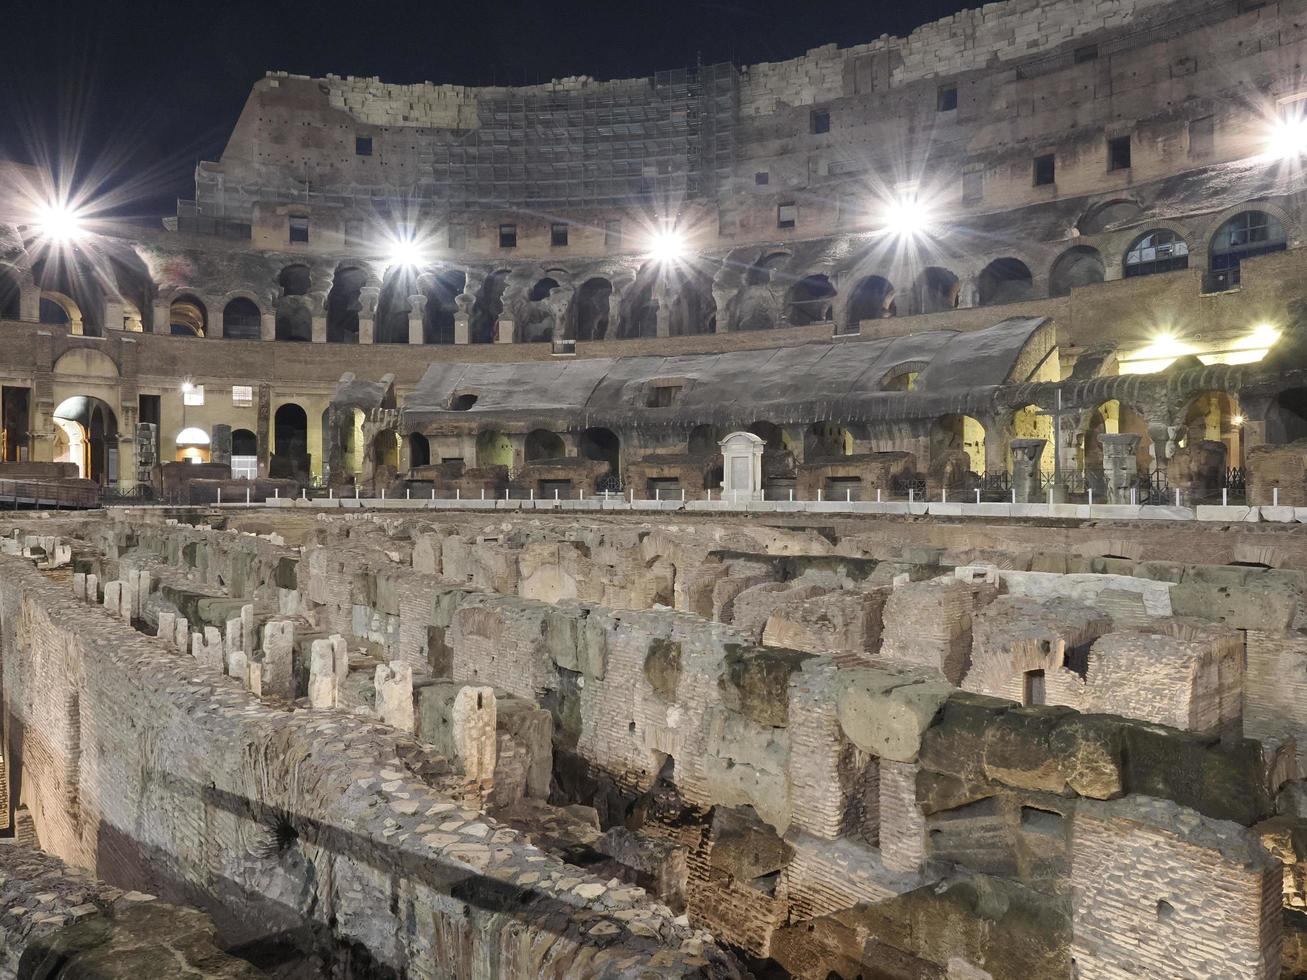 Colosseum in Rome, Italy interior view at night, 2022 photo